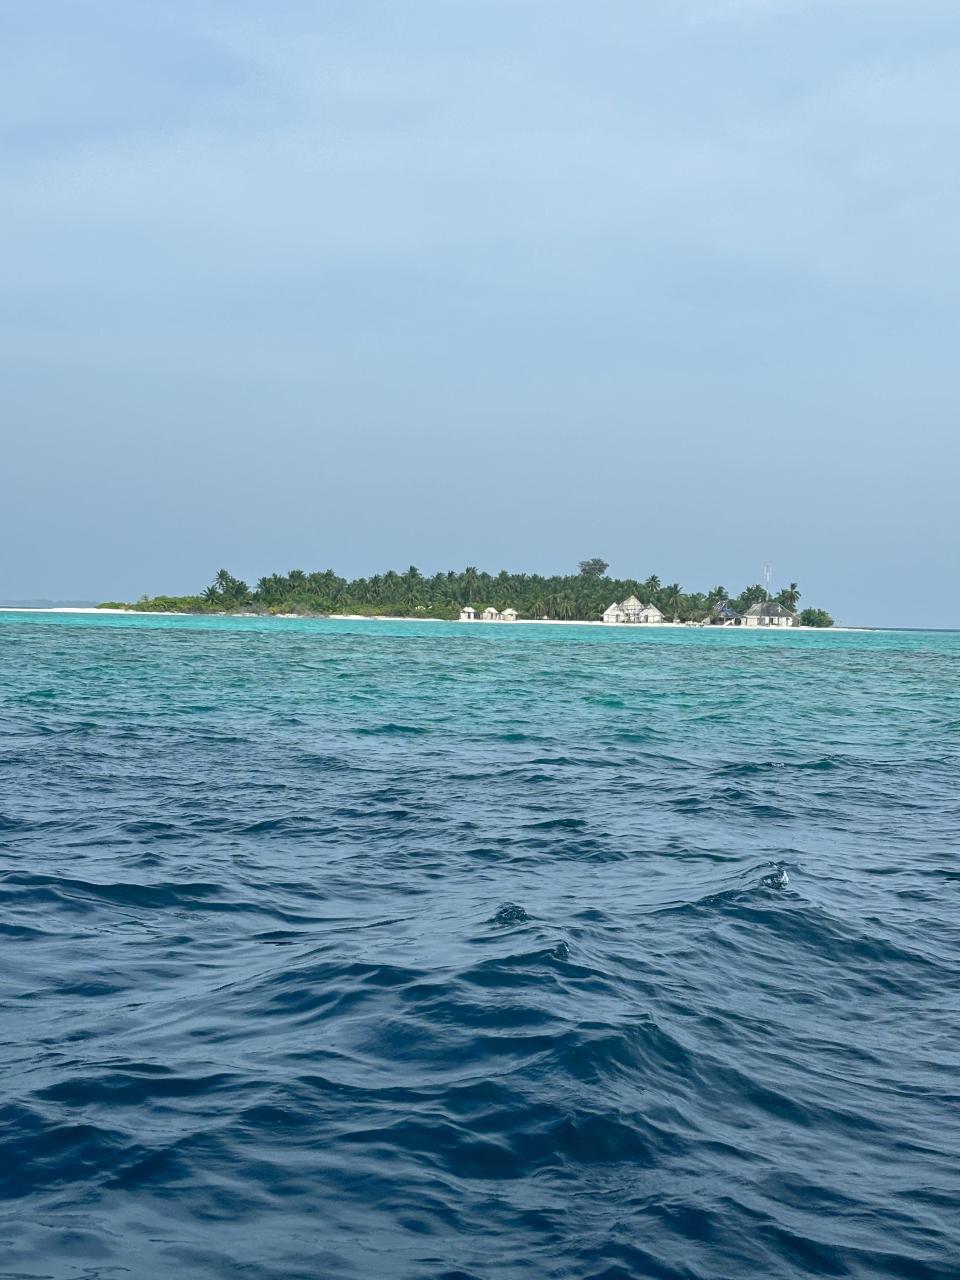 Less than 200 islands are inhabited.